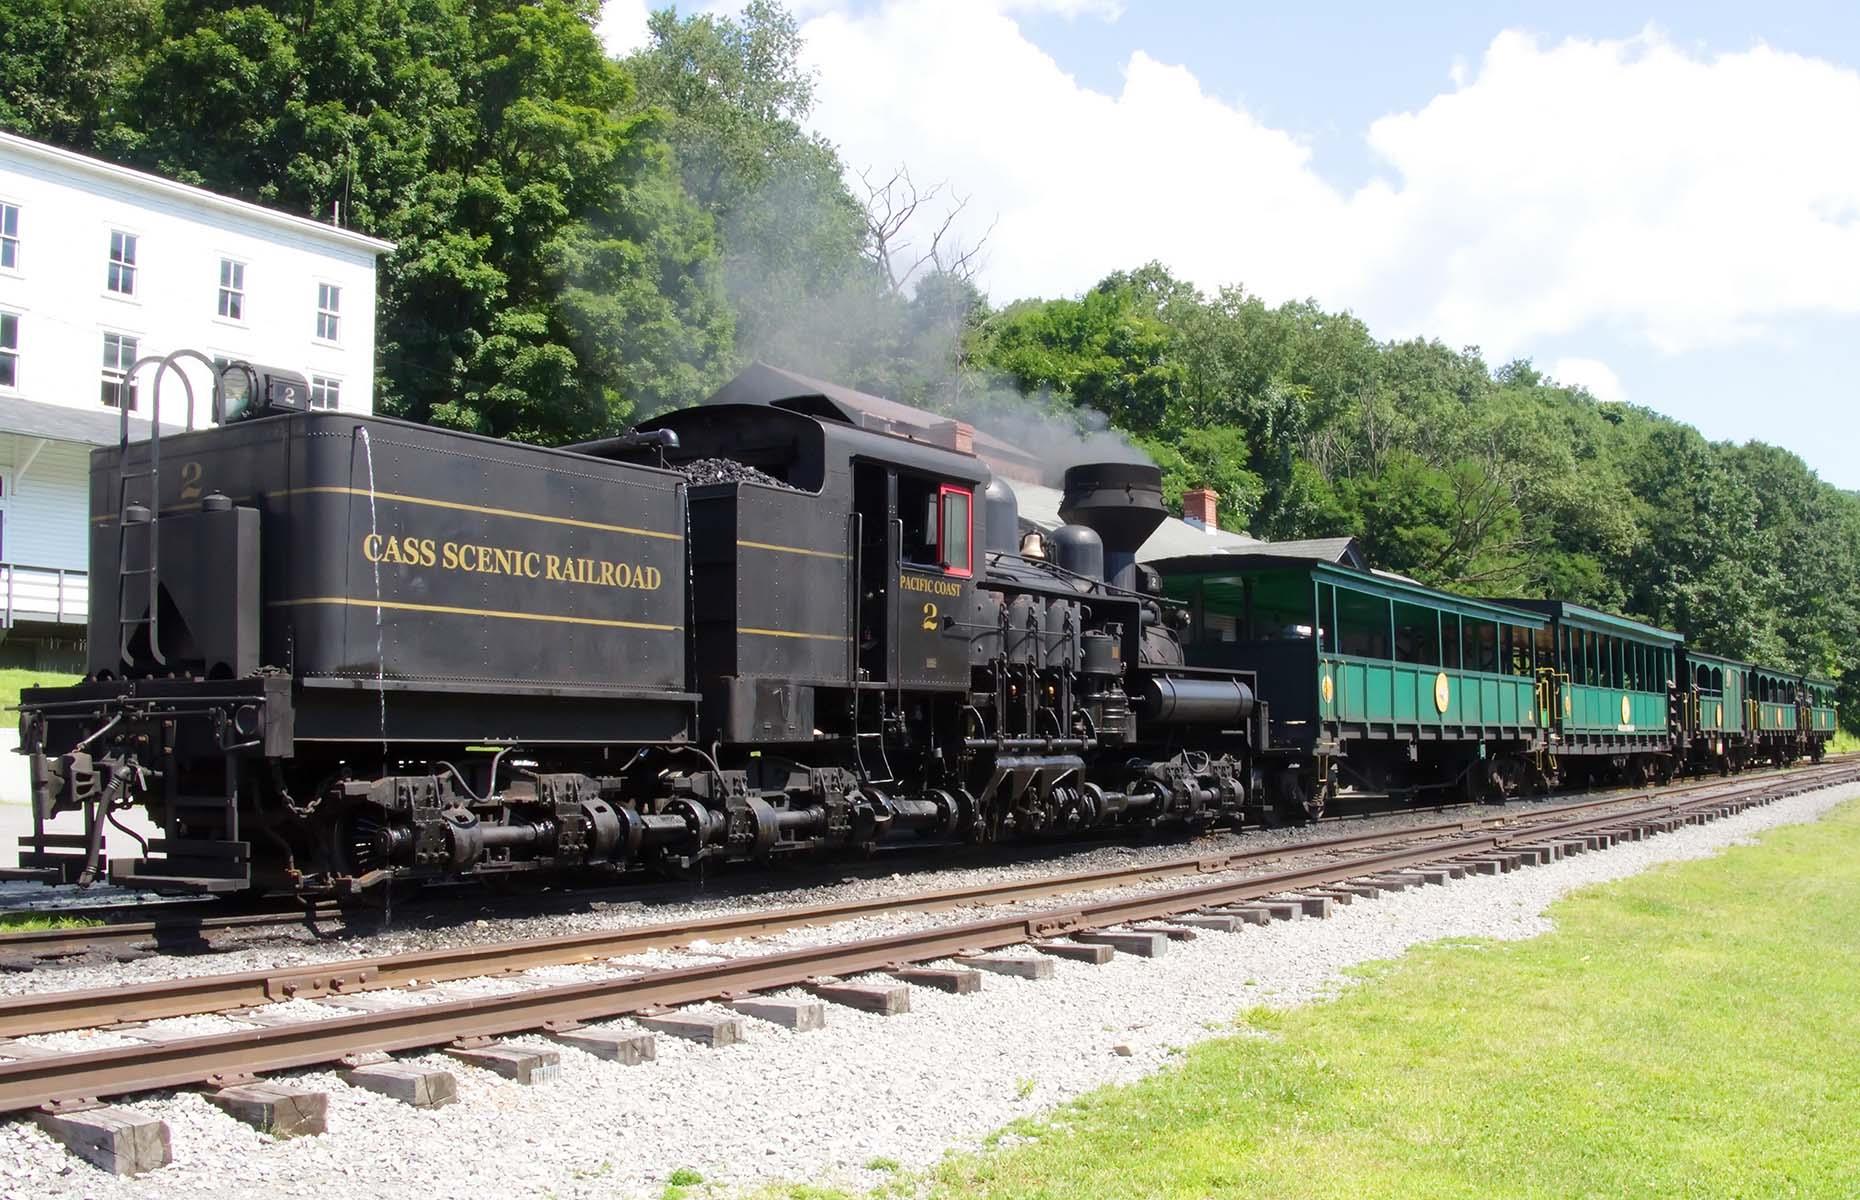 <p>The <a href="http://wvstateparks.com/park/cass-scenic-railroad-state-park/">Cass Scenic Railroad State Park</a> is a charming lumber heritage railroad in the mountains of West Virginia's Pocahontas County. The 11-mile (18km) each way route takes in gorgeous country views and the historic company town of Cass. Steam locomotives whisk passengers to the summit of Bald Knob, the highest point on Back Allegheny Mountain, on a 4.5-hour round trip. Passengers ride on open-sided log cars and a traditional "King of the Road hobo lunch" (meat and potatoes cooked in foil) is served on board after passing Old Spruce junction.</p>